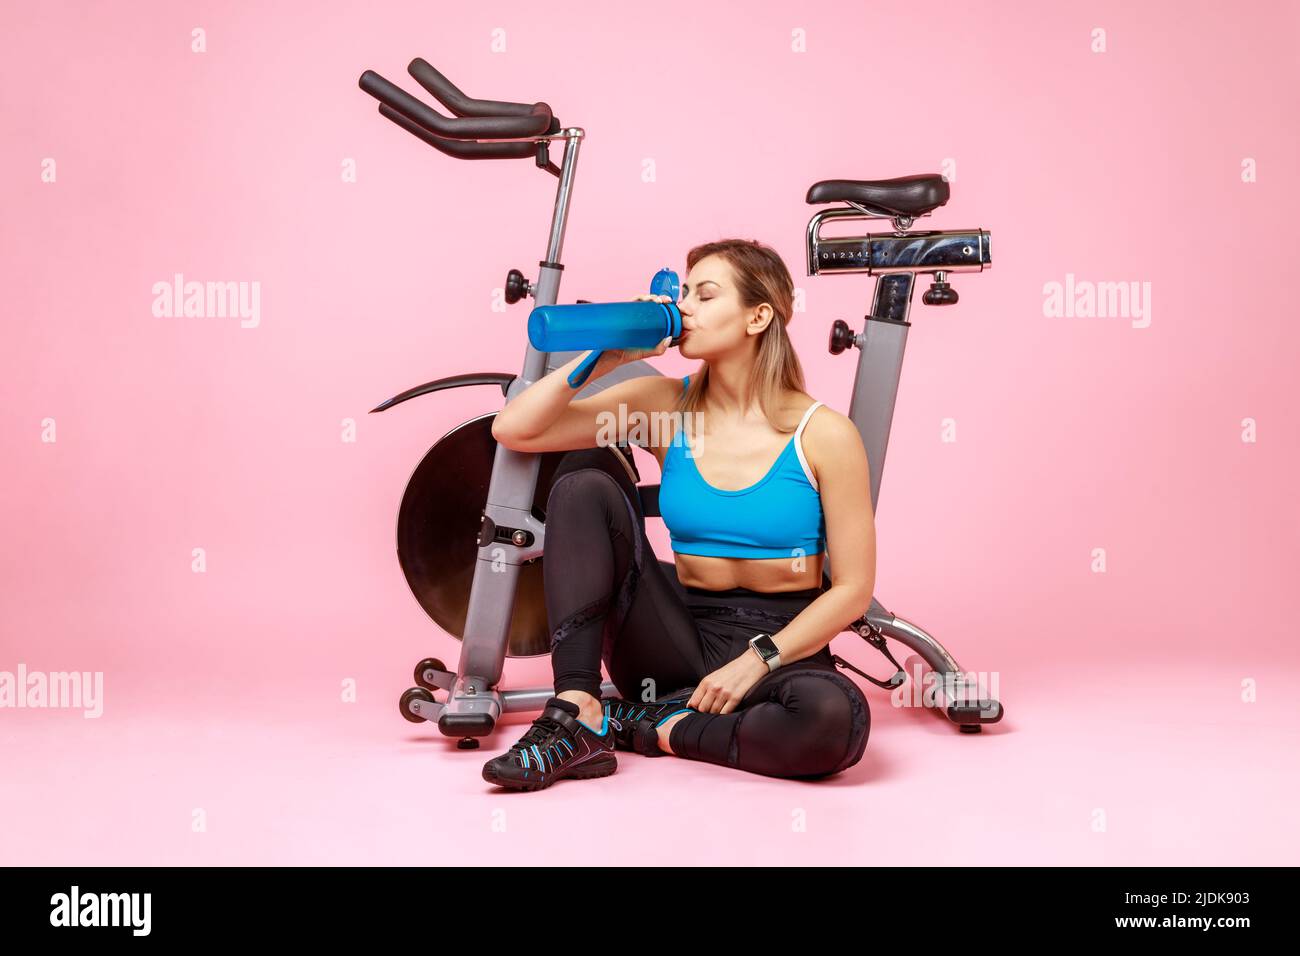 Portrait of thirsty athletic woman drinking water from bottle, restoring water balance after exhausted workout, wearing sports tights and top. Indoor studio shot isolated on pink background. Stock Photo